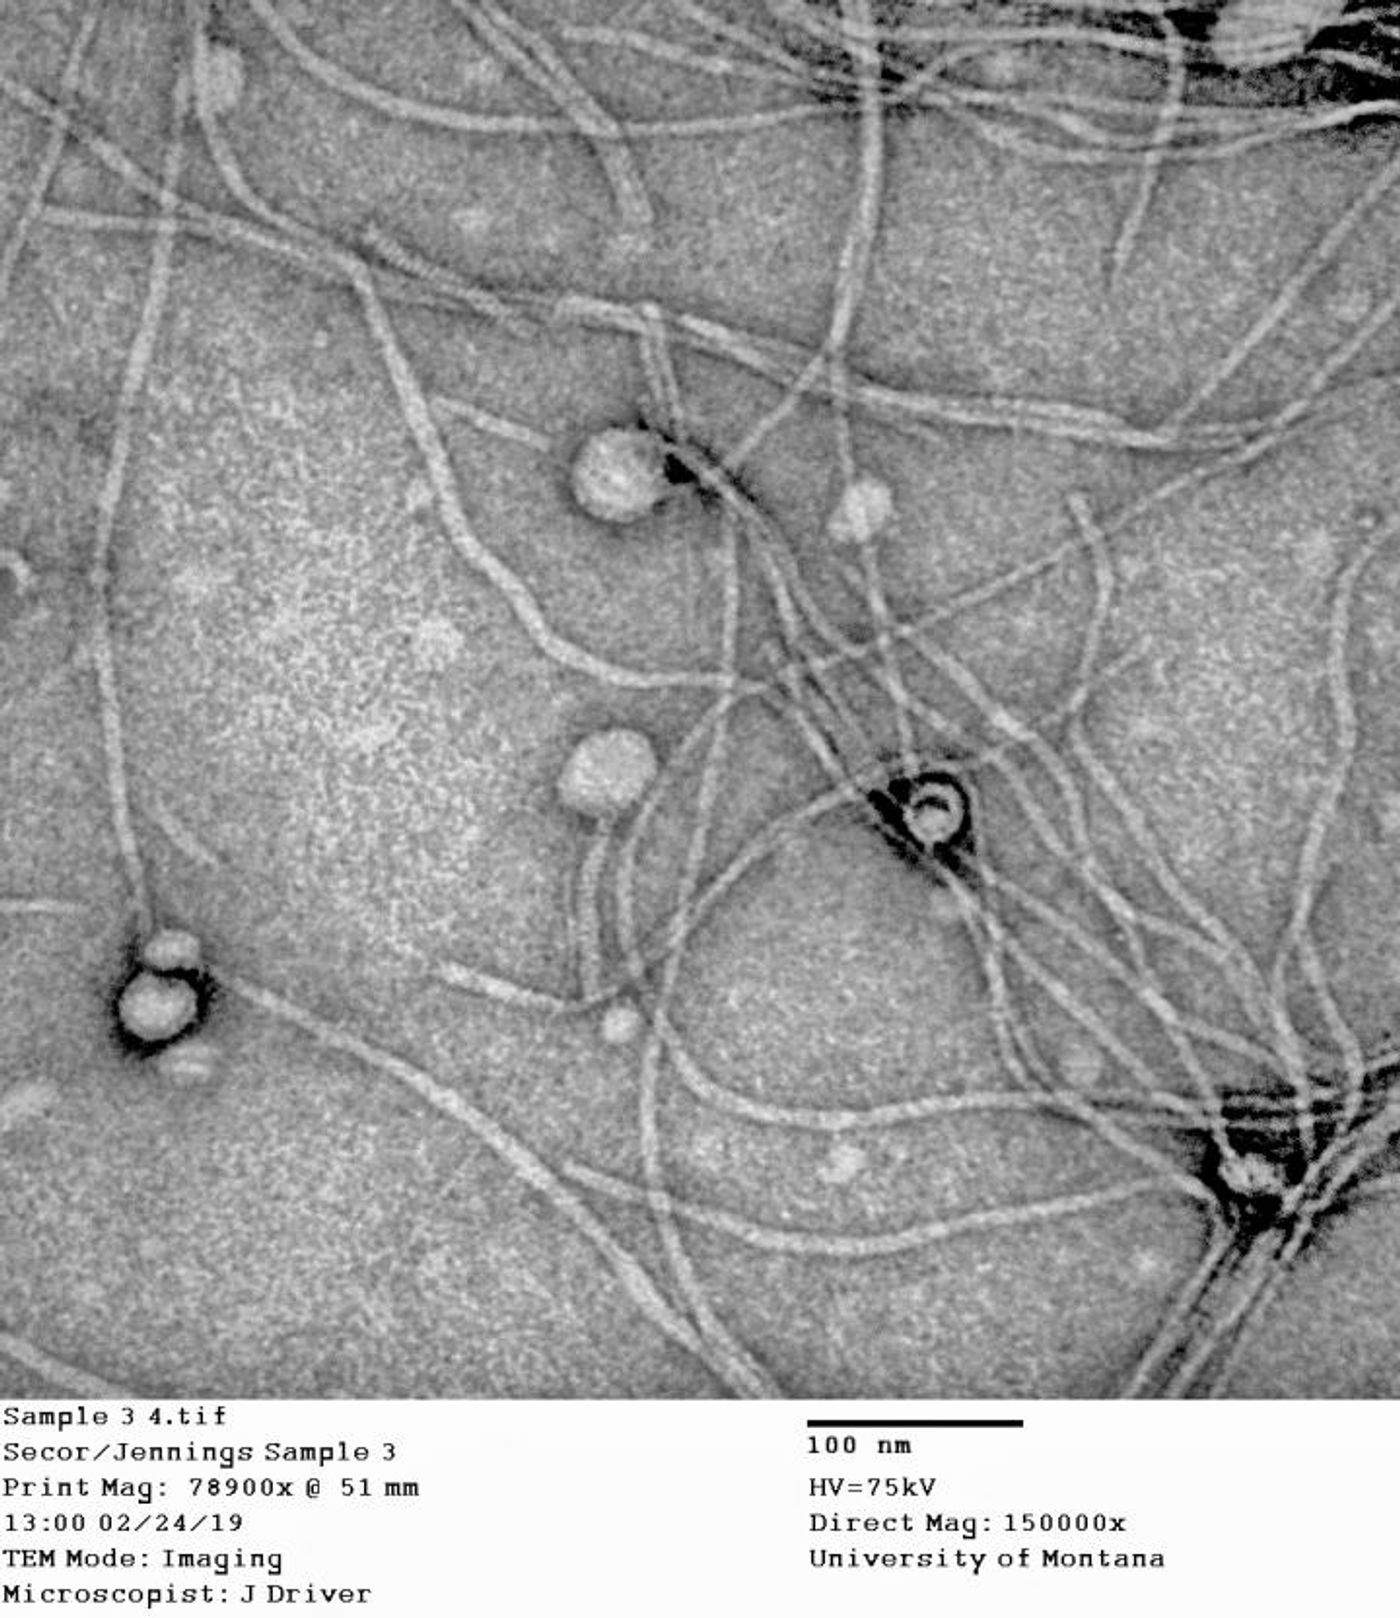 Multiple filamentous PF bacteriophage virions under an electron microscope. University of Montana researchers published new insights in the Journal Science on how bacteria cause infections, which may help with future infection treatments. / Credit: University of Montana